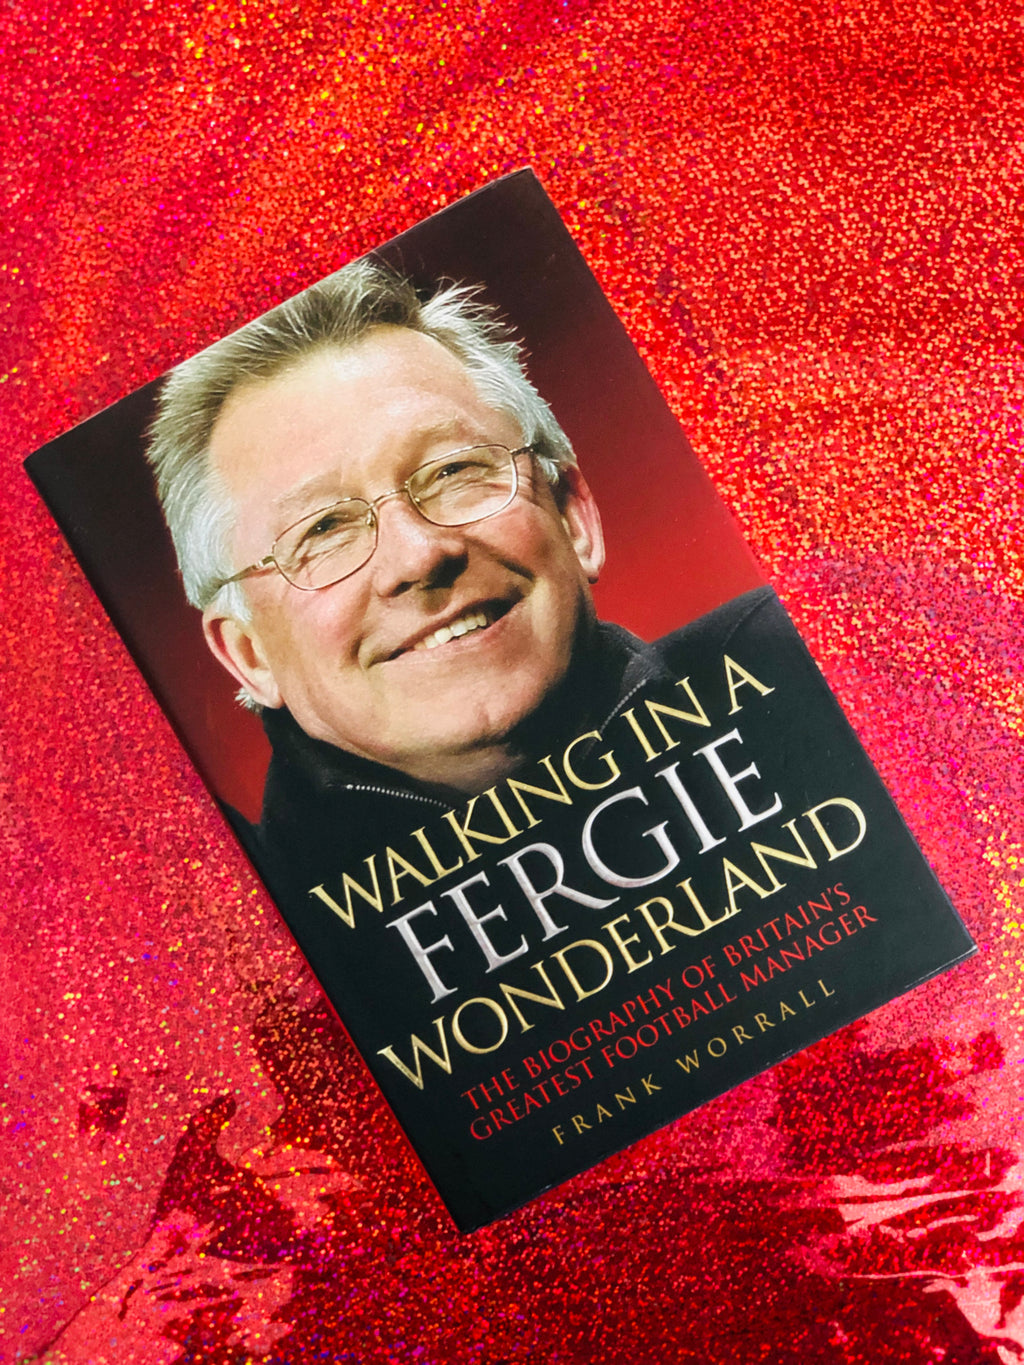 Walking In A Fergie Wonderland: The Biography of Britain's Greatest Football Manager- By Frank Worrall